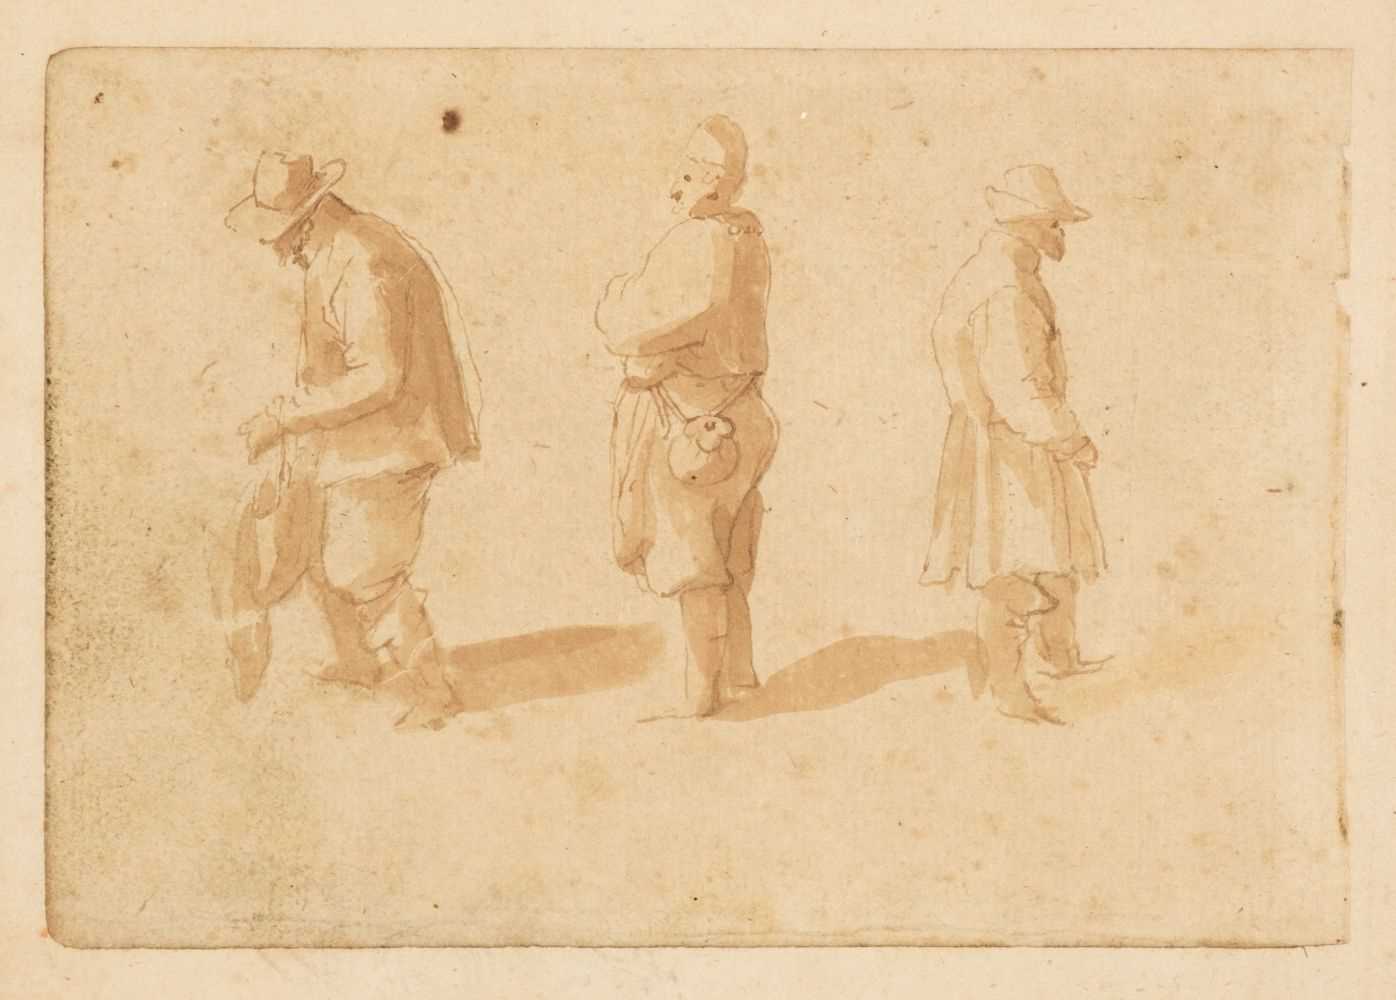 Lot 16 - Breughel (Jan, 1568-1625). Three Peasants, probably late 16th or early 17th century